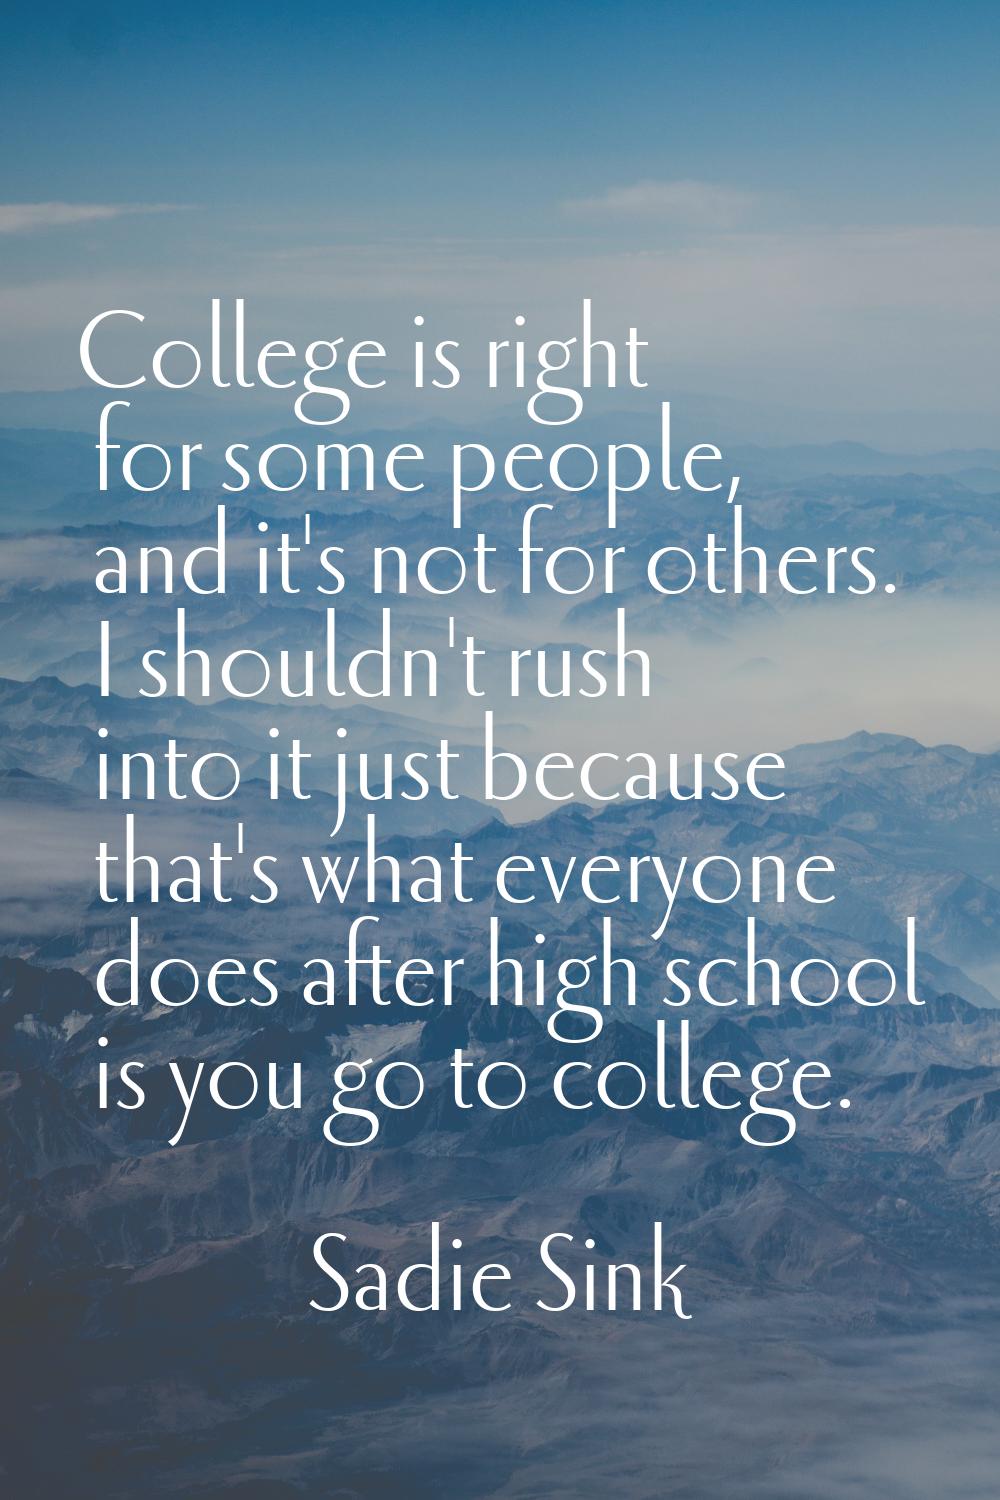 College is right for some people, and it's not for others. I shouldn't rush into it just because th